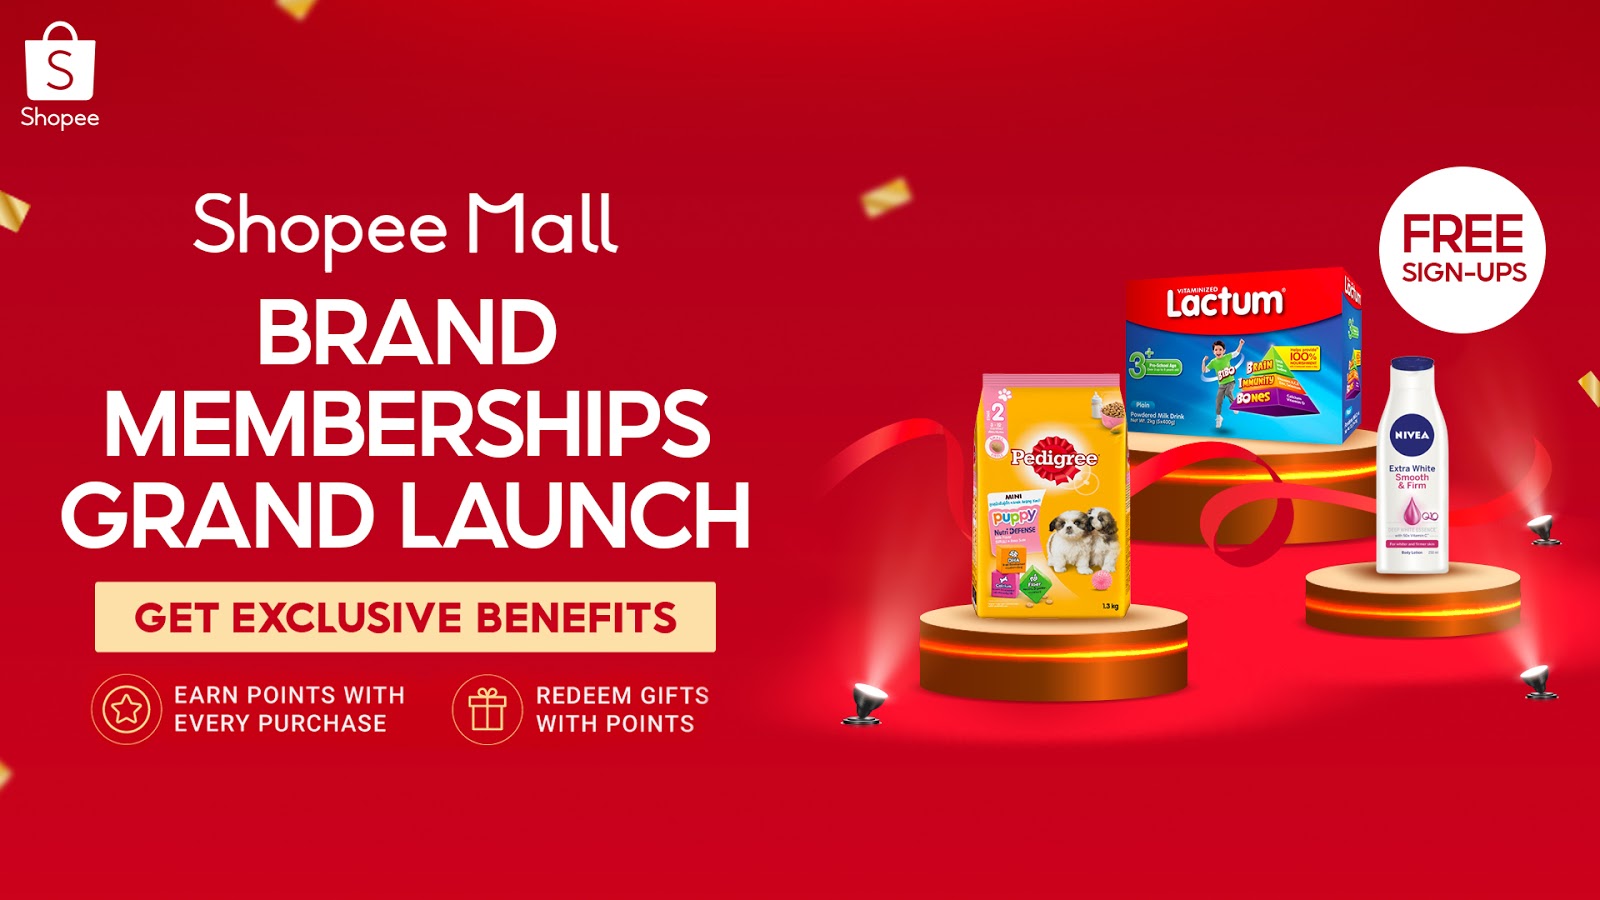 Shopee Mall Launches Brand Memberships Program to Help Brands Grow Customer Loyalty and Retention